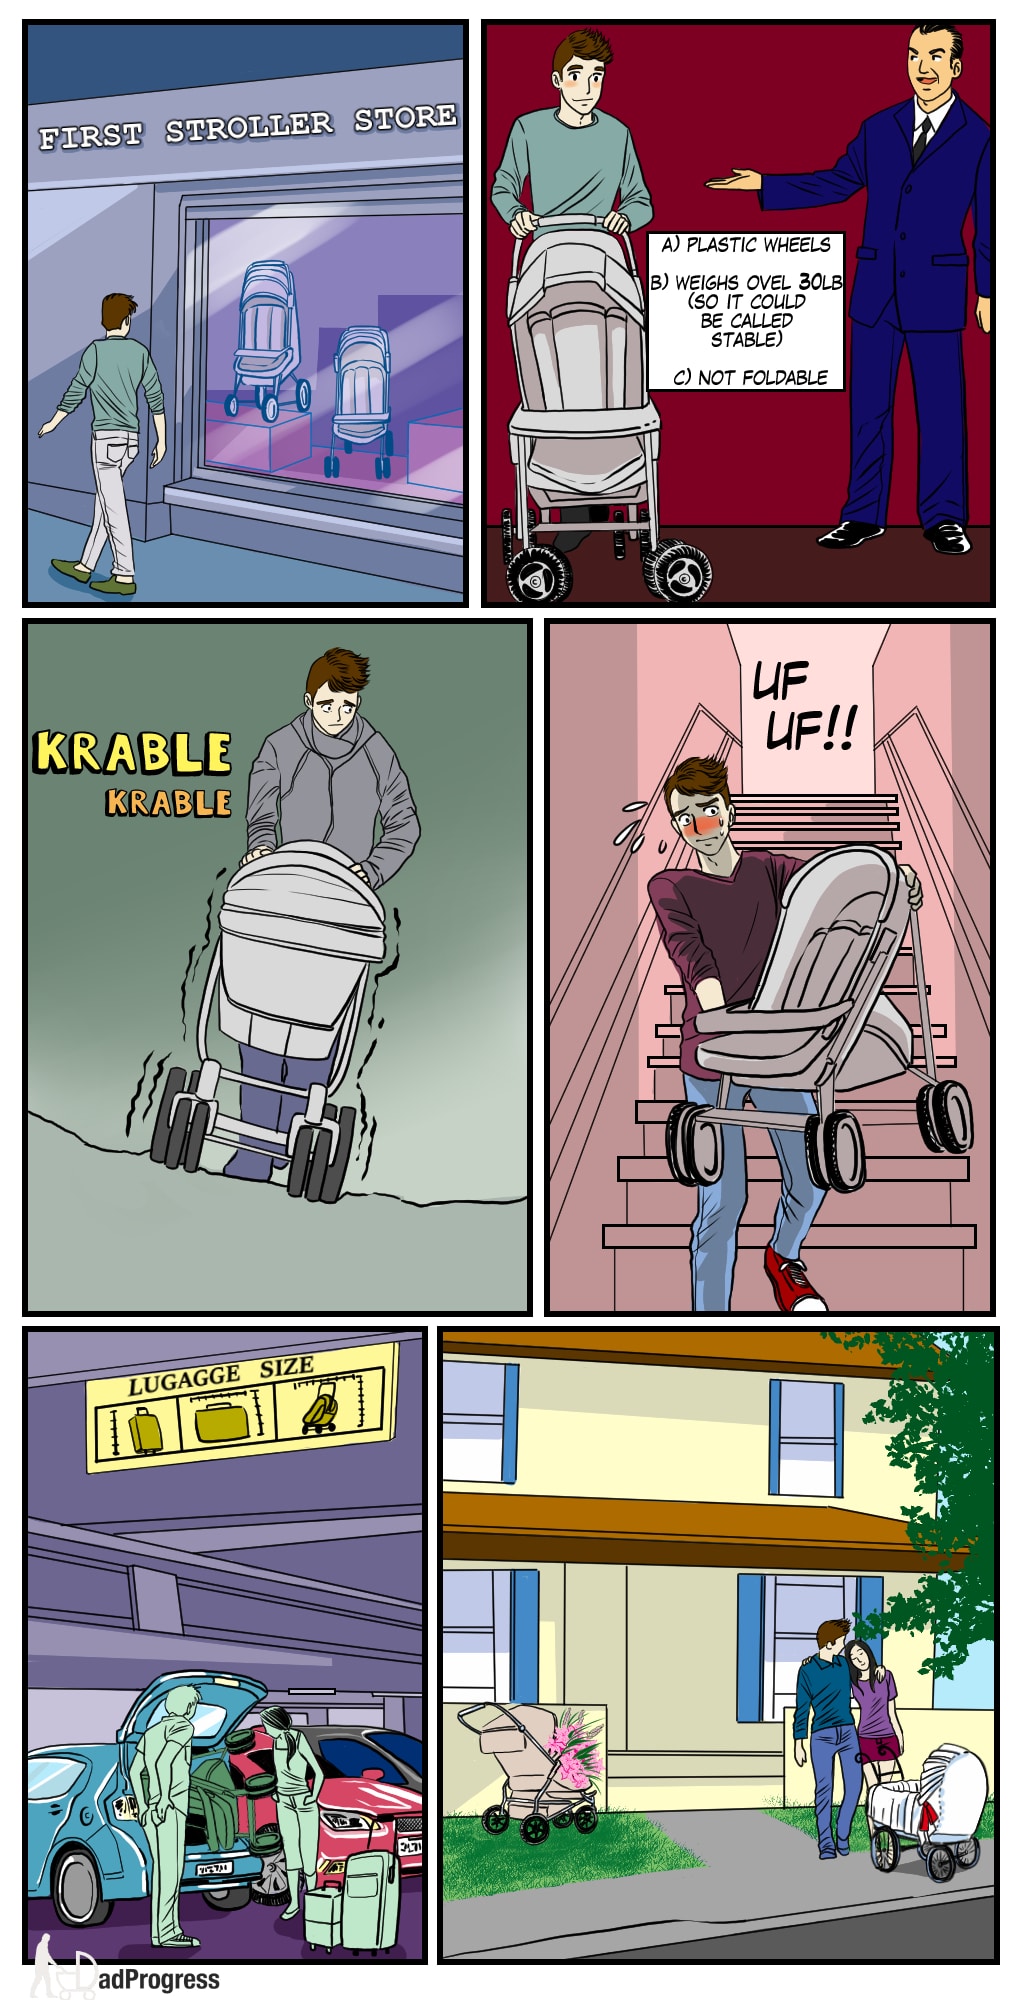 In the comic strip a guy walks into the first stroller store. He ends up buying a non-foldable heavy stroller with plastic wheels and is unhappy using it. He buys a new stroller and uses the old one as a flowerpot.